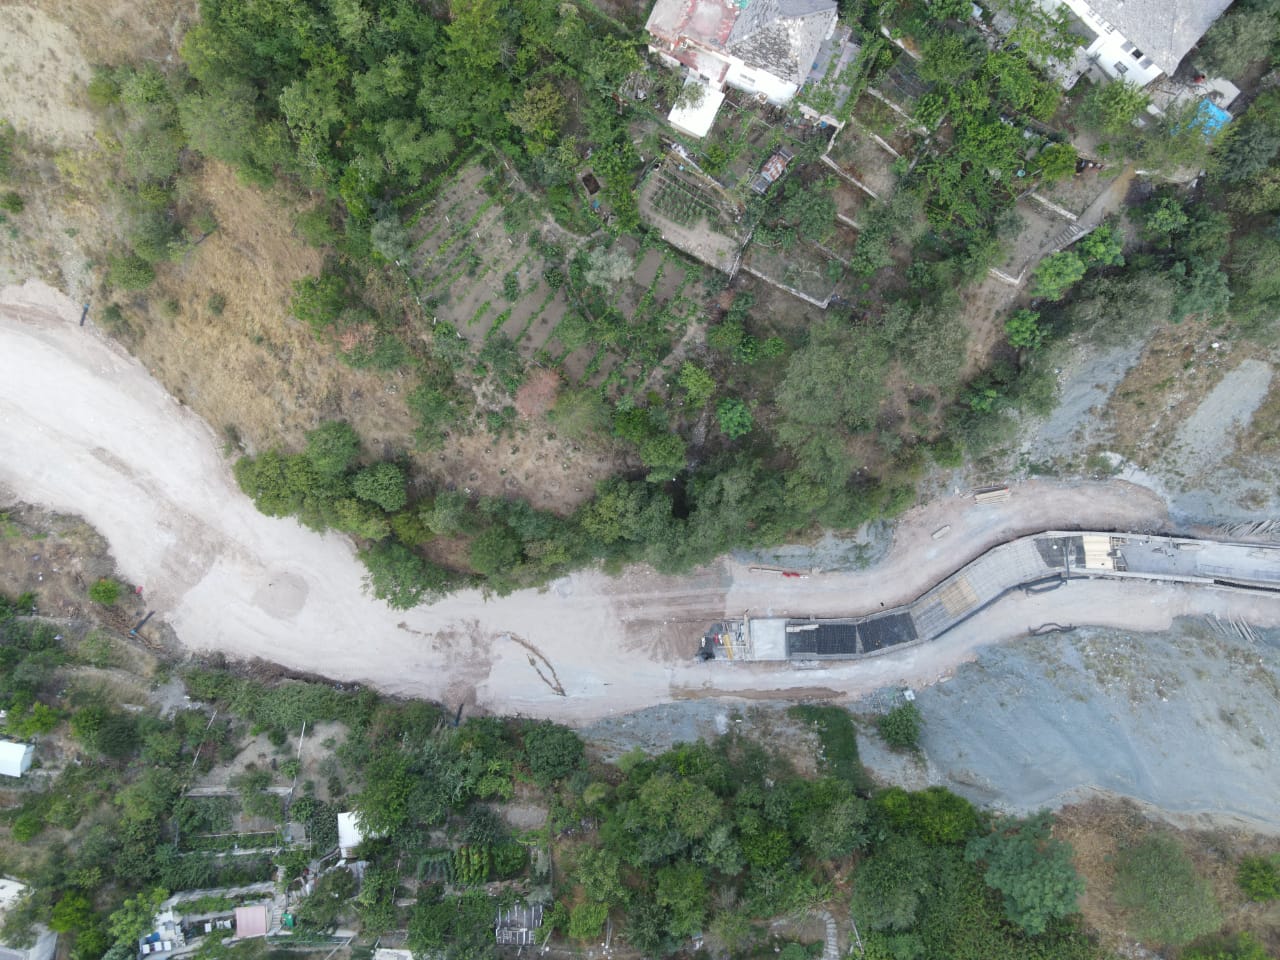 Gjirokaster Bypass: Landslides, Ignoring UNESCO and Potential Conflicts of Interest